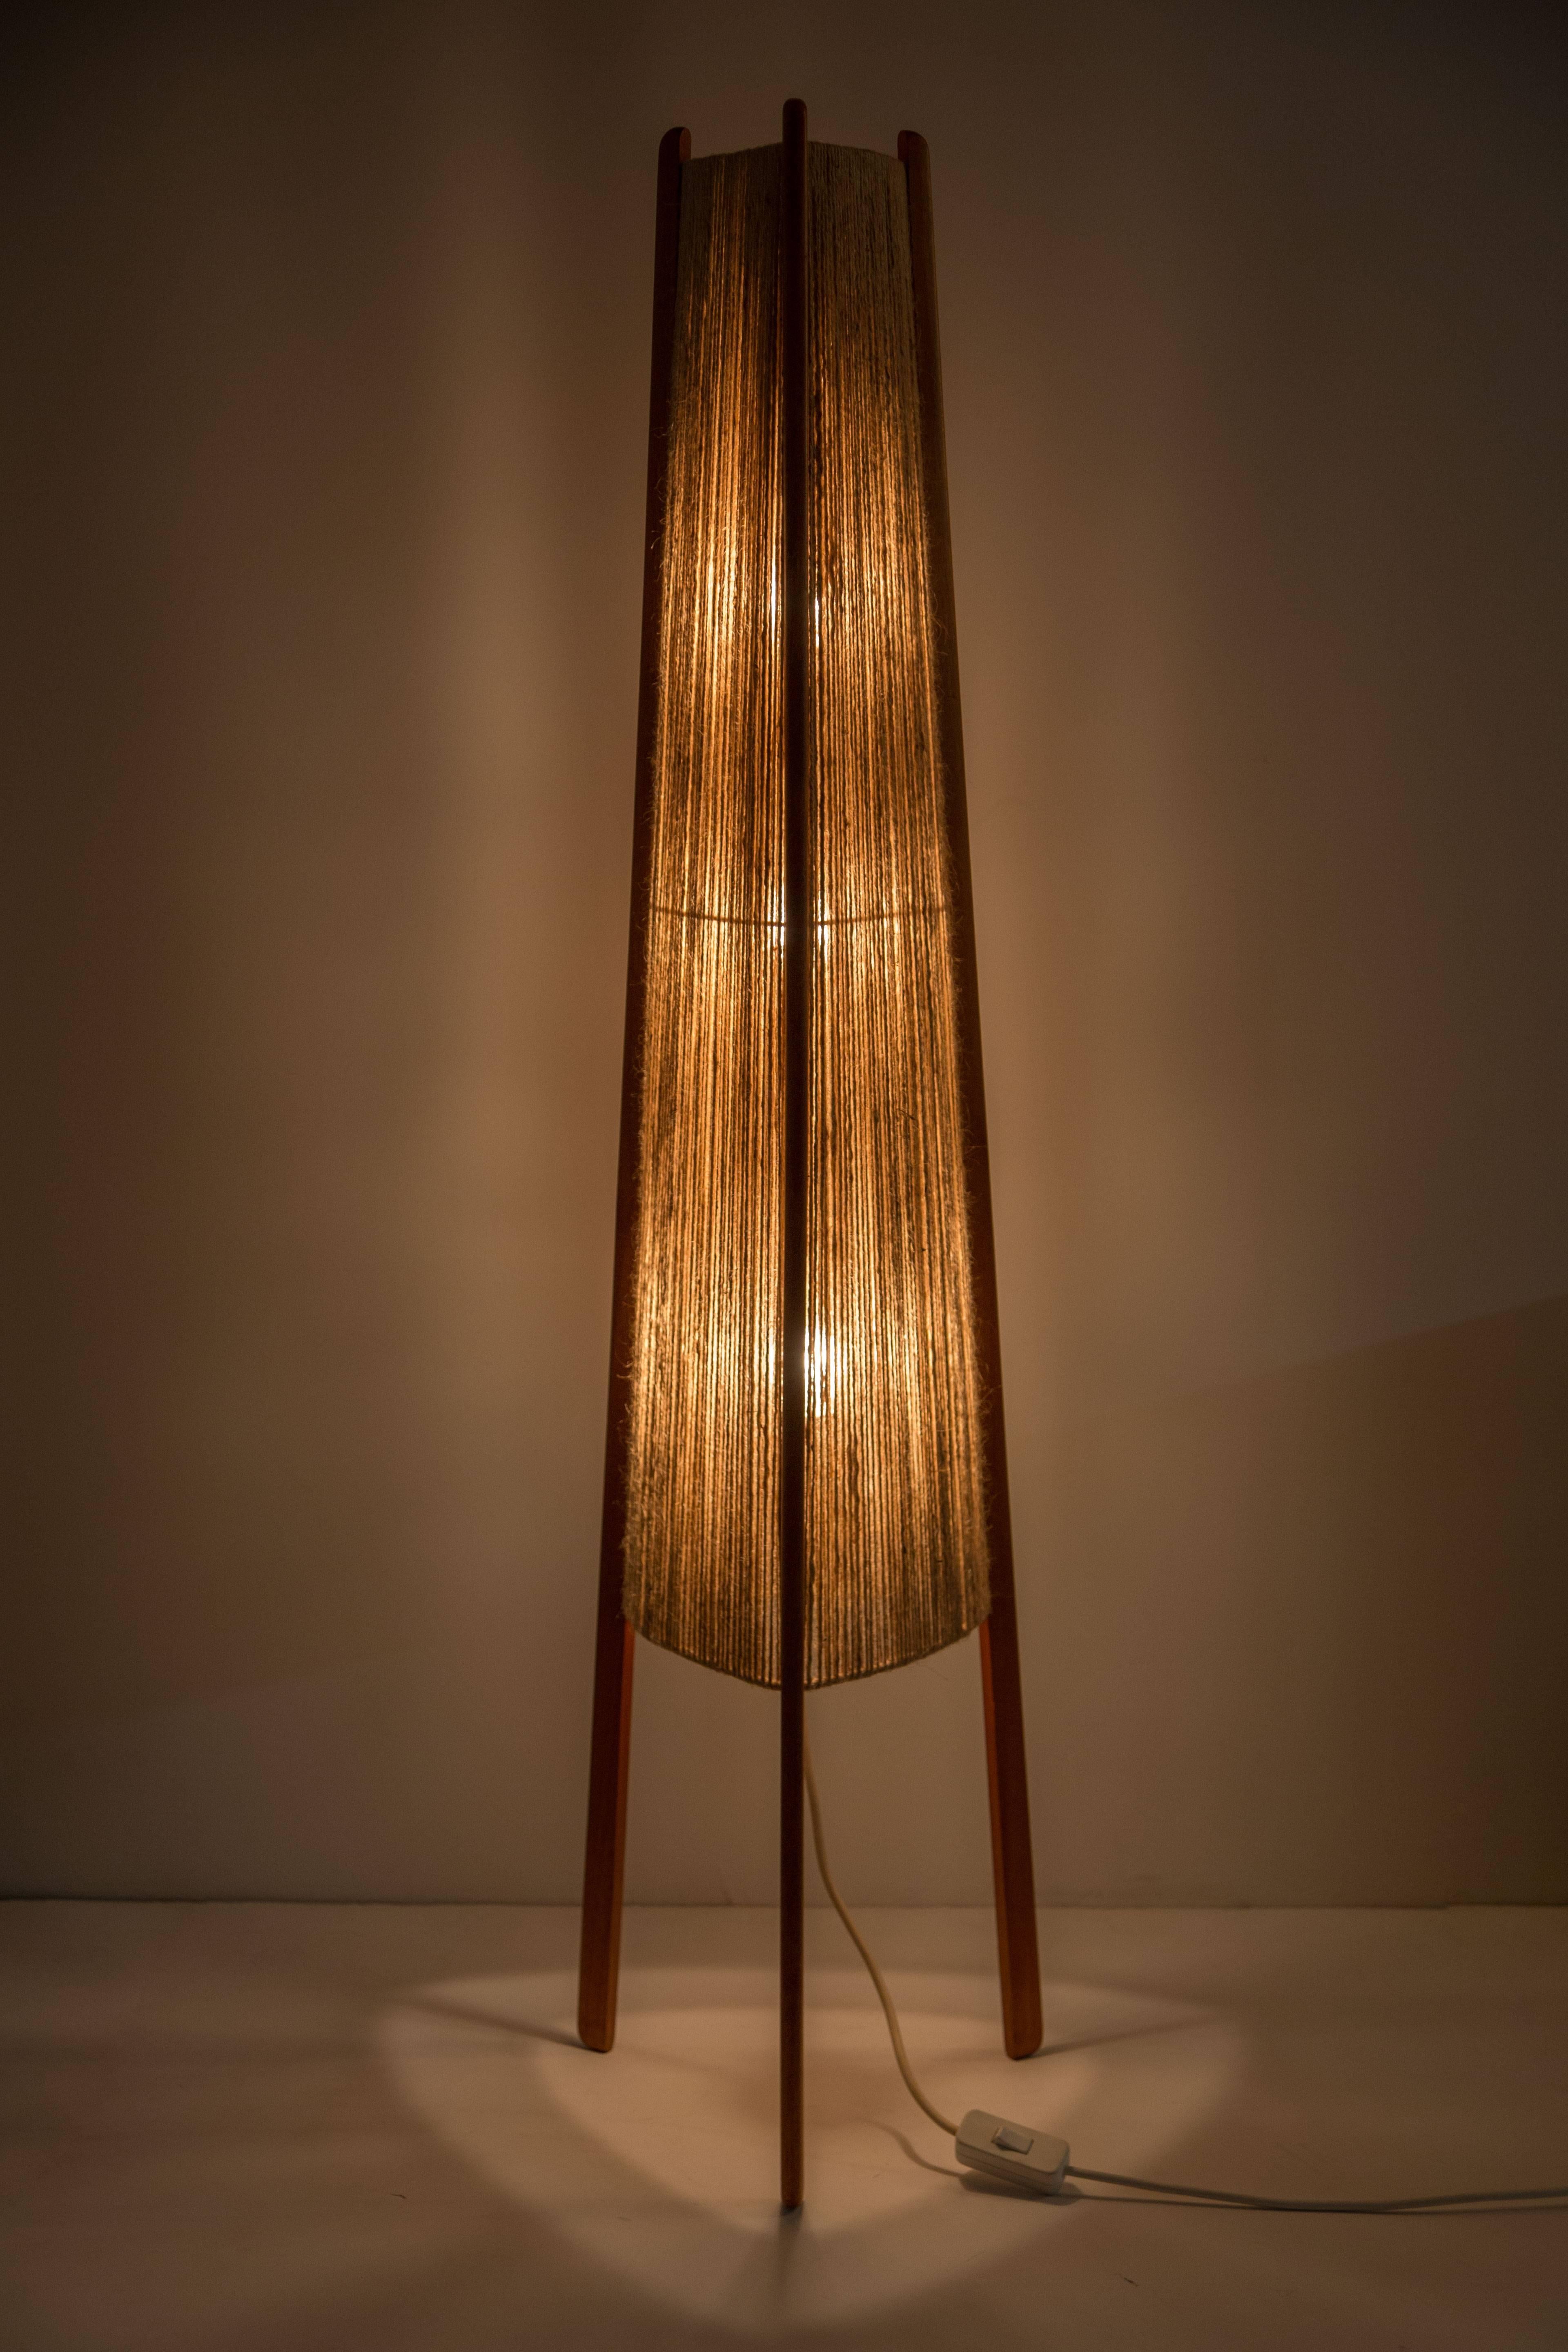 A handwoven jute shade with solid teak legs.